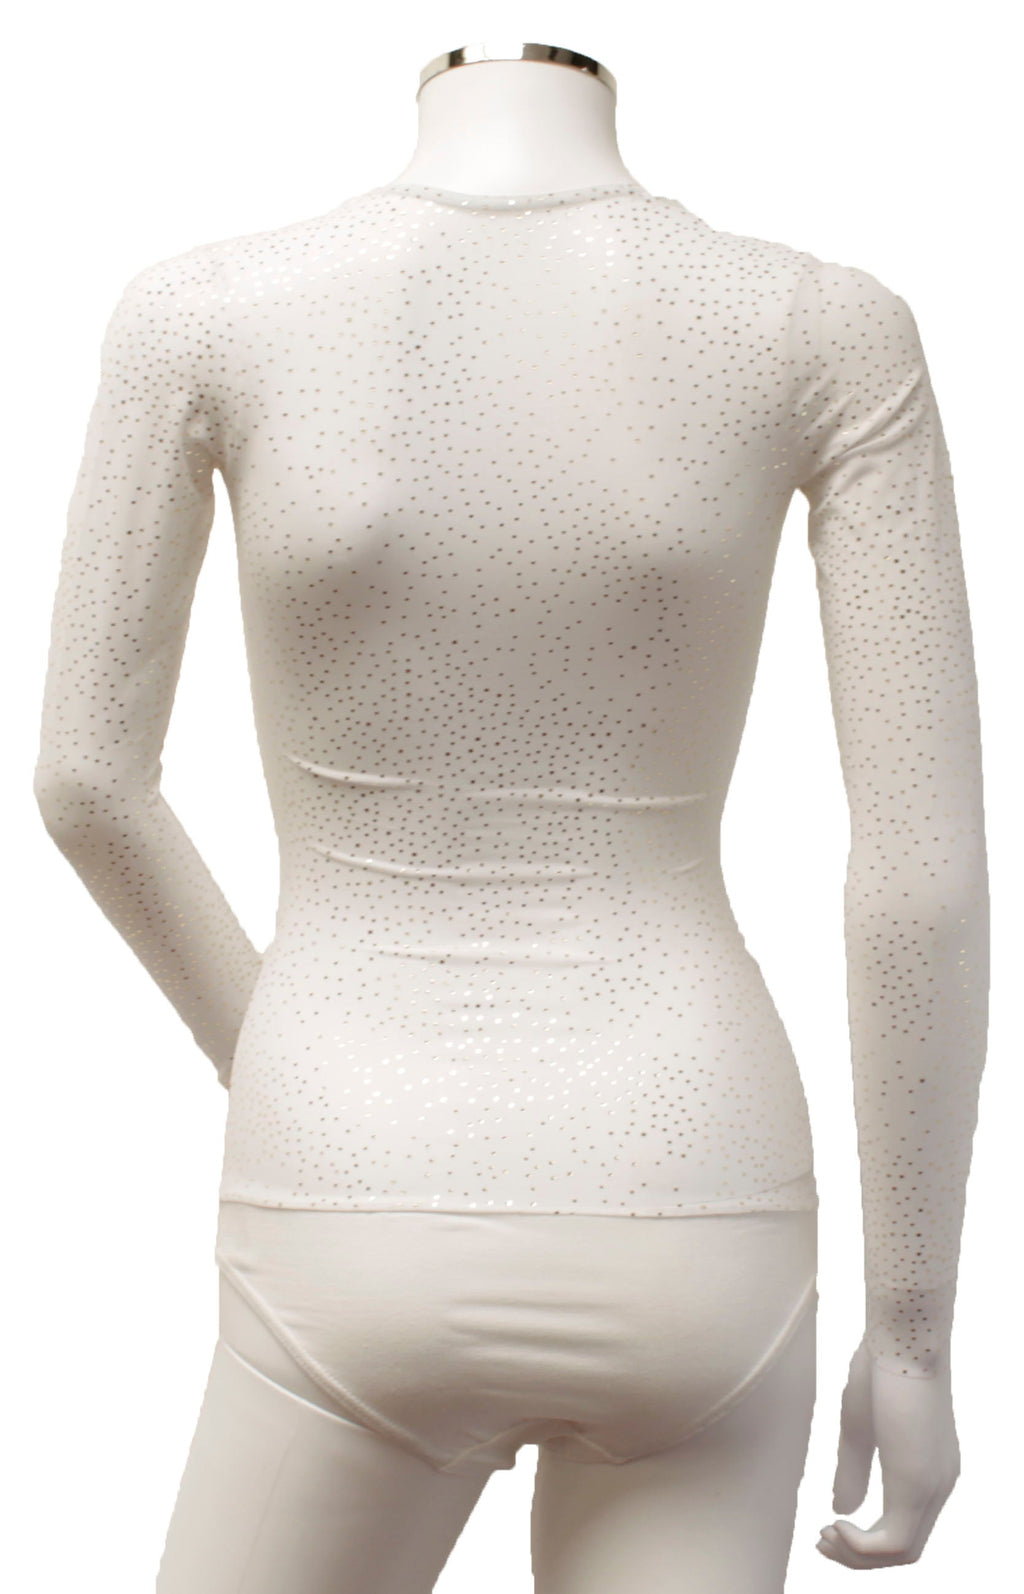 IN STOCK - Underbust with Sleeves - White Gold Sparkles